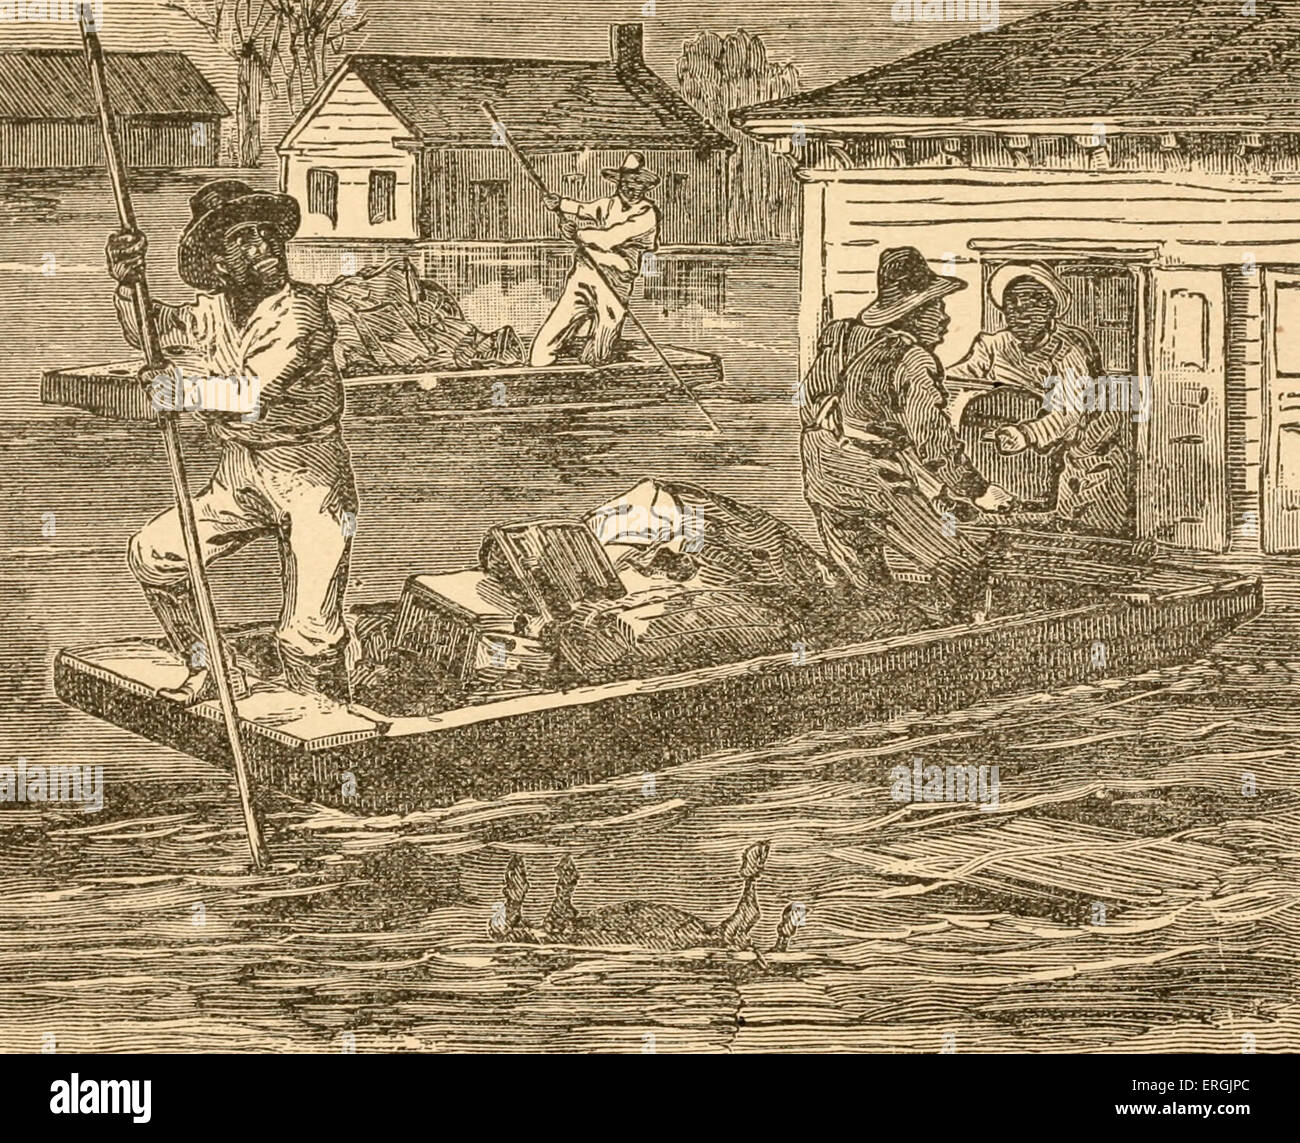 Negroes Moving Out - African Americans fleeing the rising flood waters - New Orleans Flood, 1882 Stock Photo